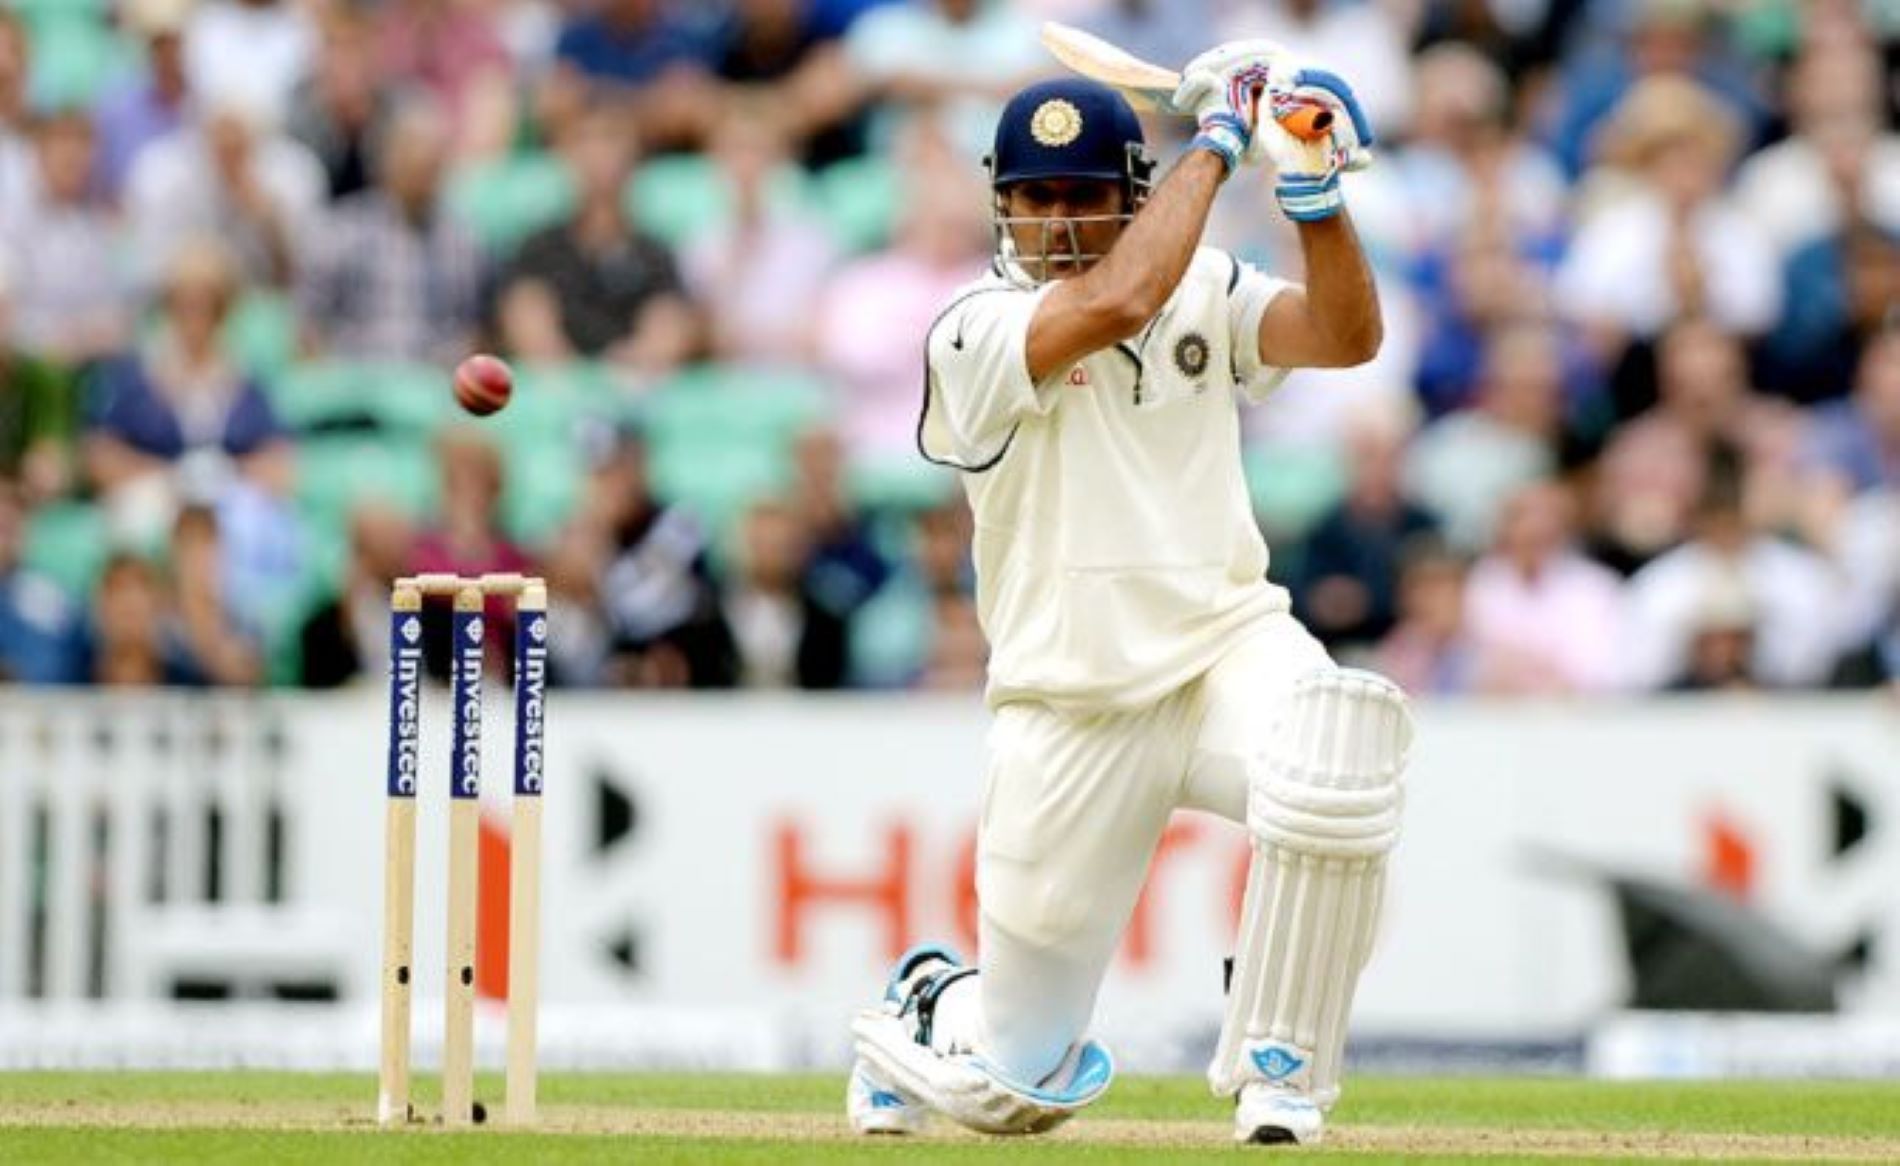 MS Dhoni played several valuable knocks in England during his Test career